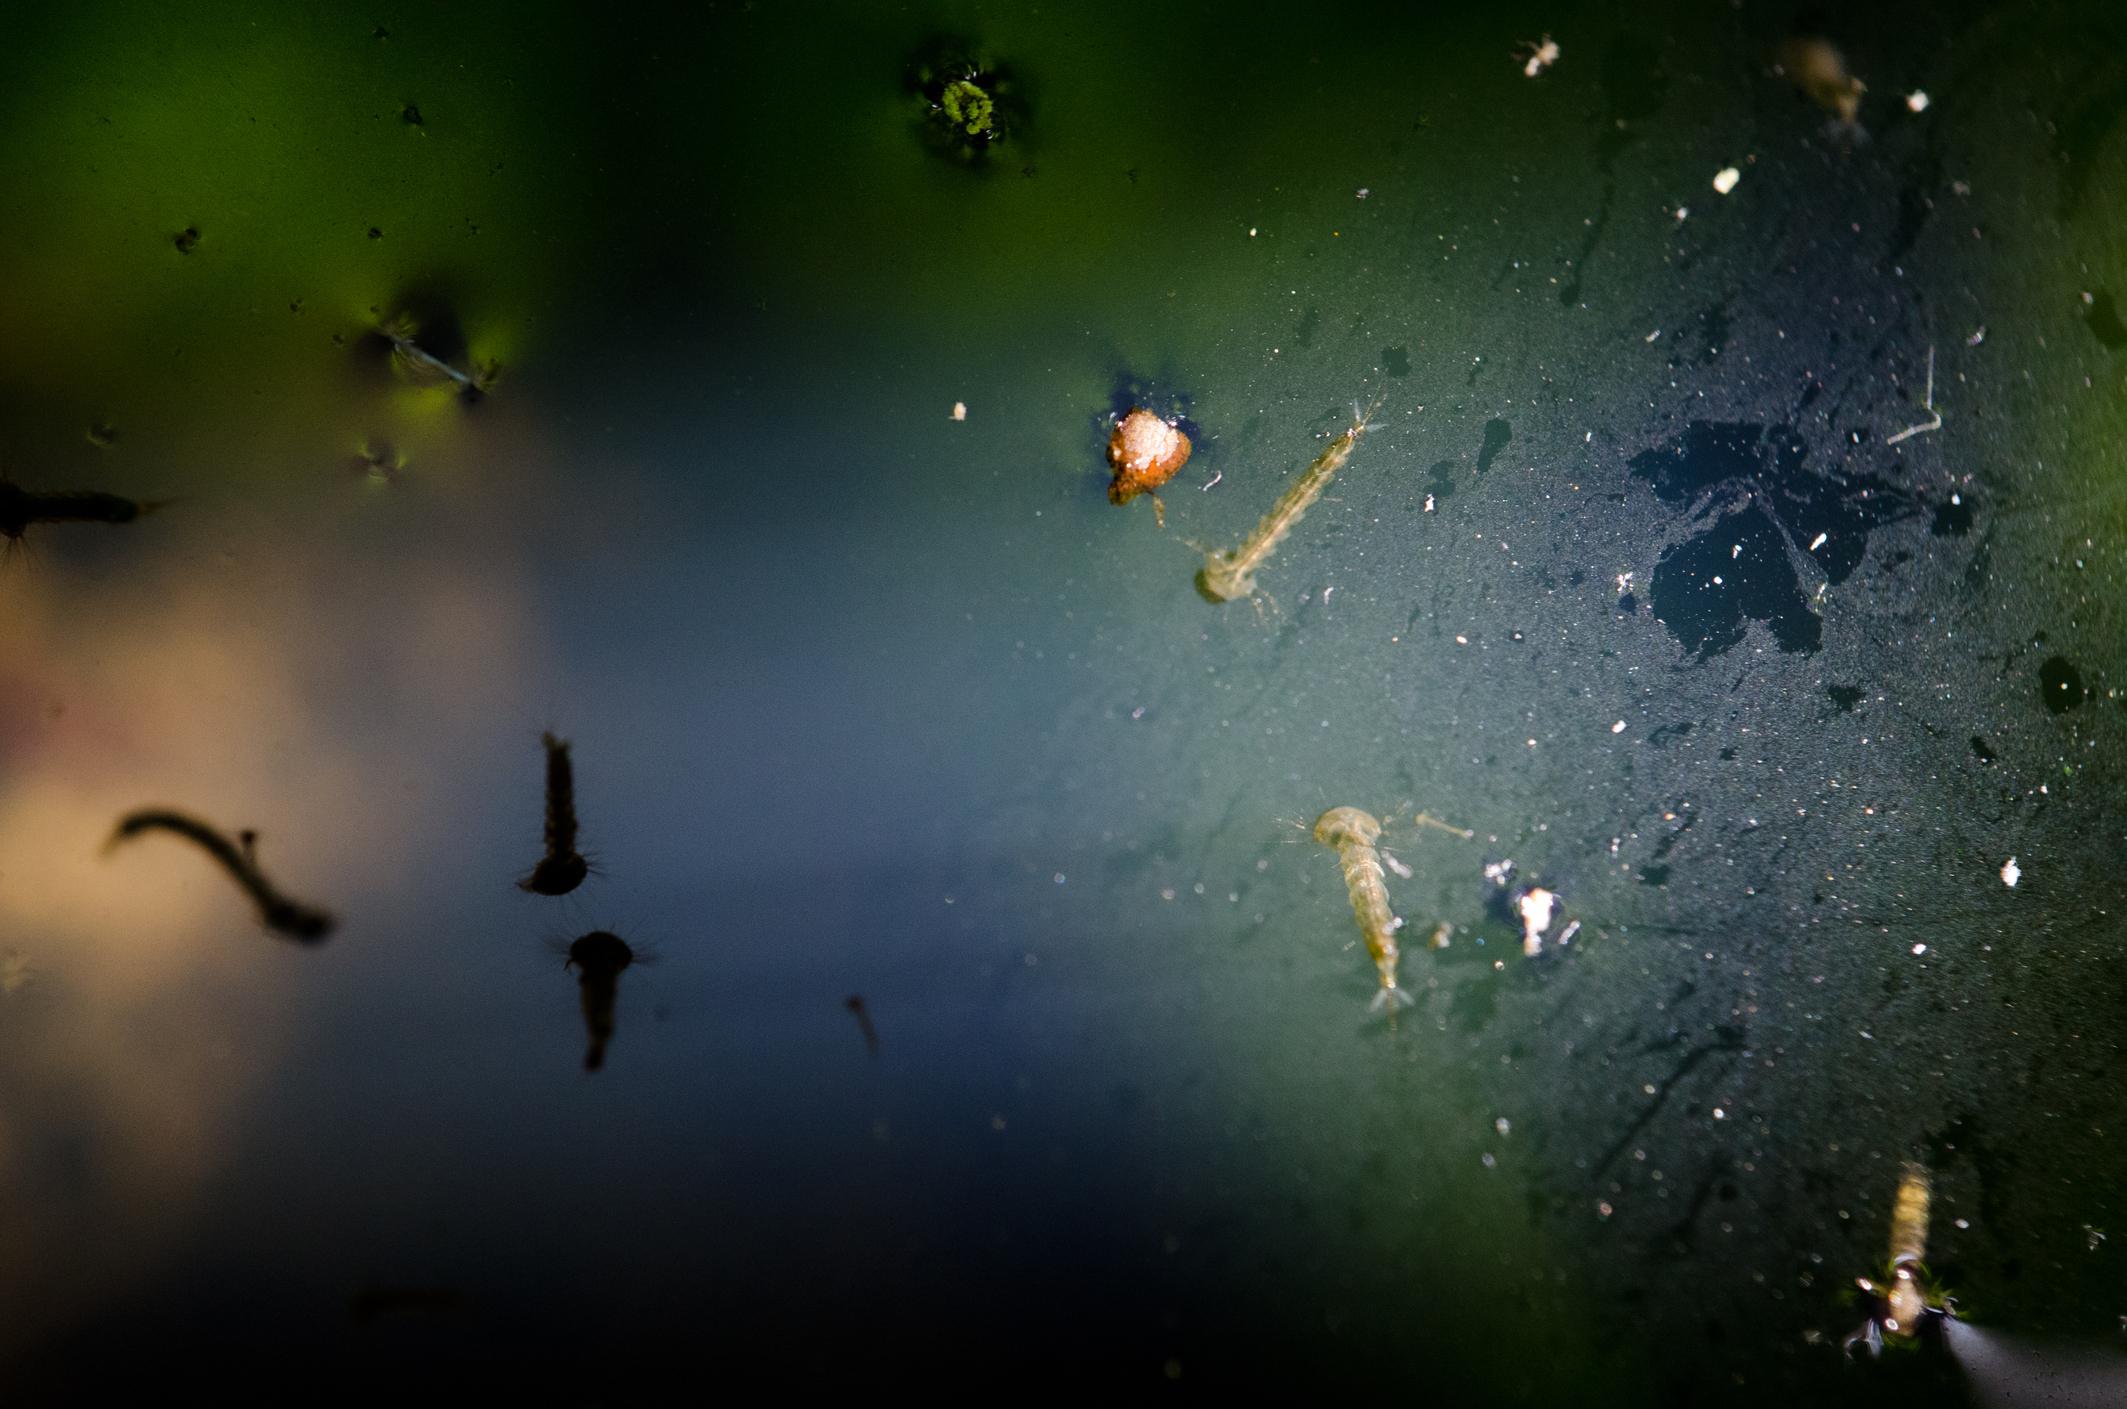 Mosquito larvae and pupa in water